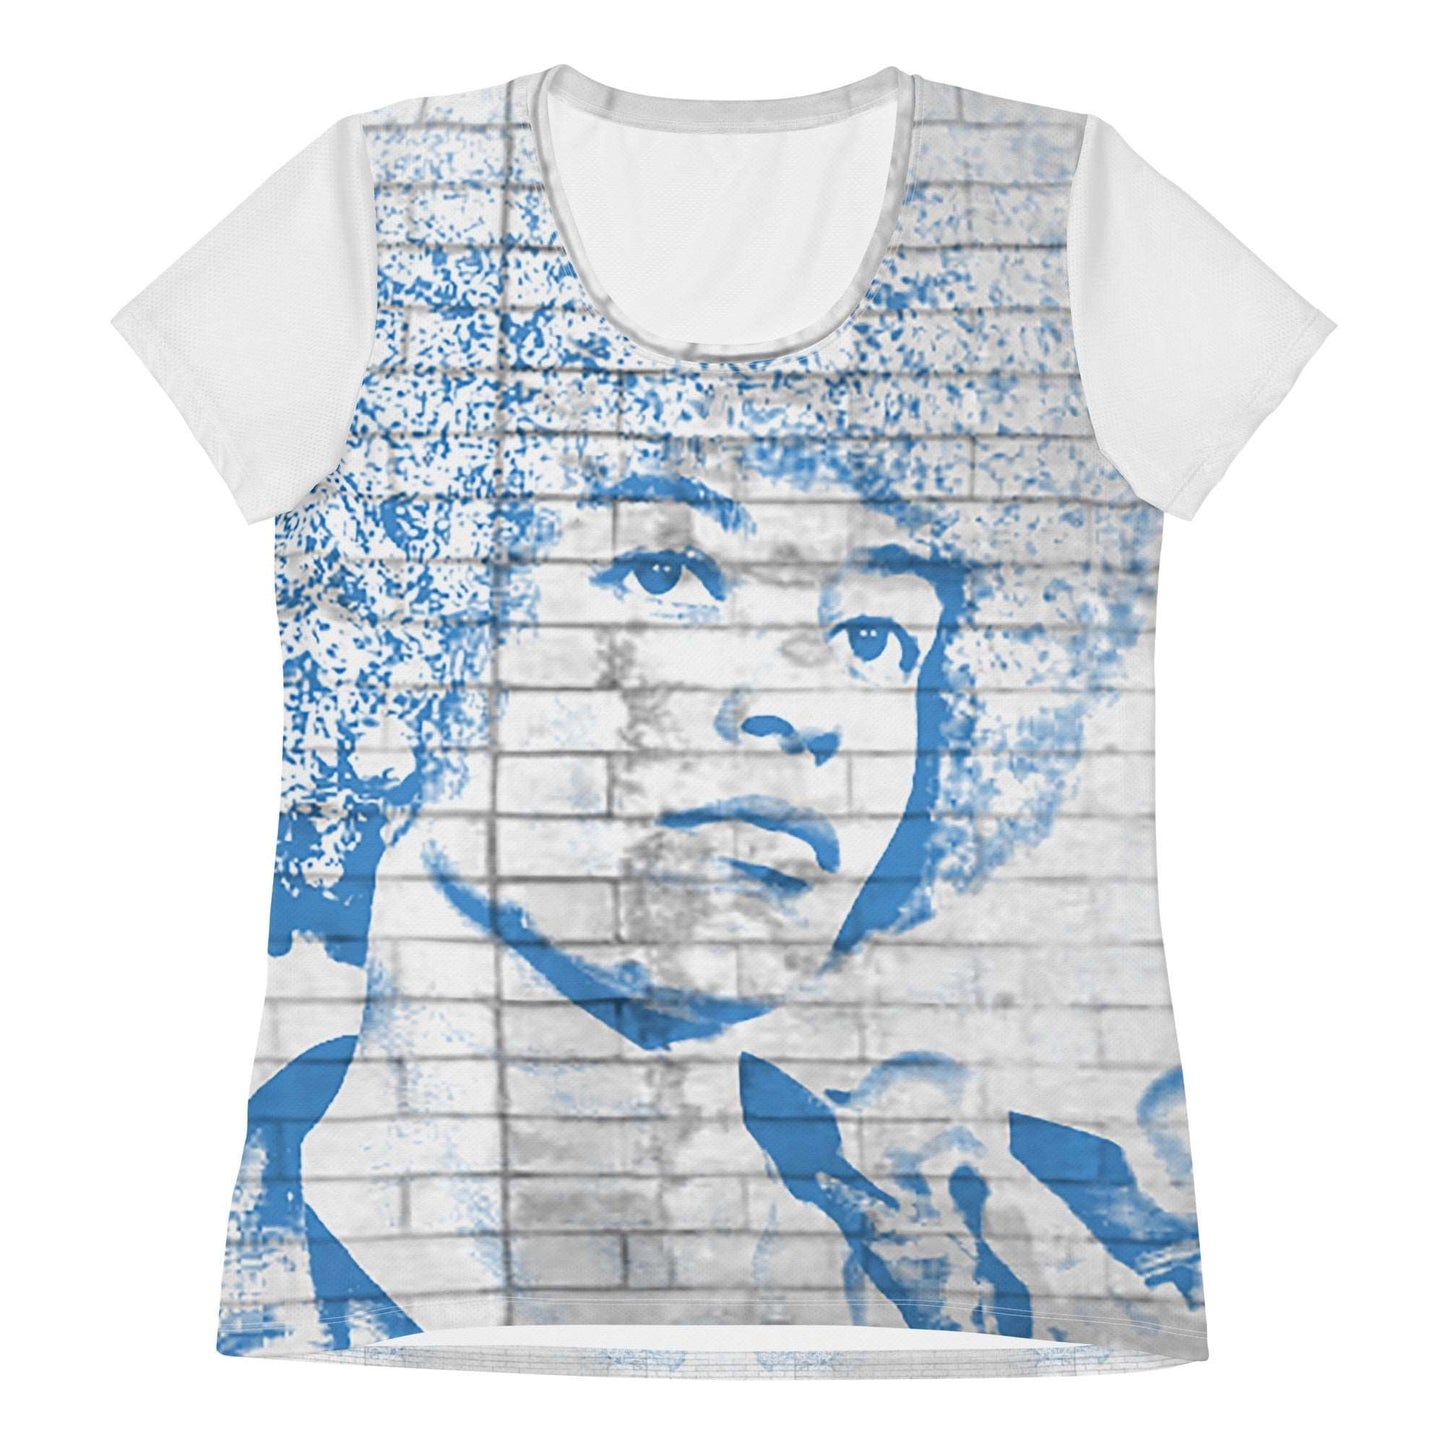 Angela Davis All-Over Print Women's Athletic T-shirt - Souled Out World